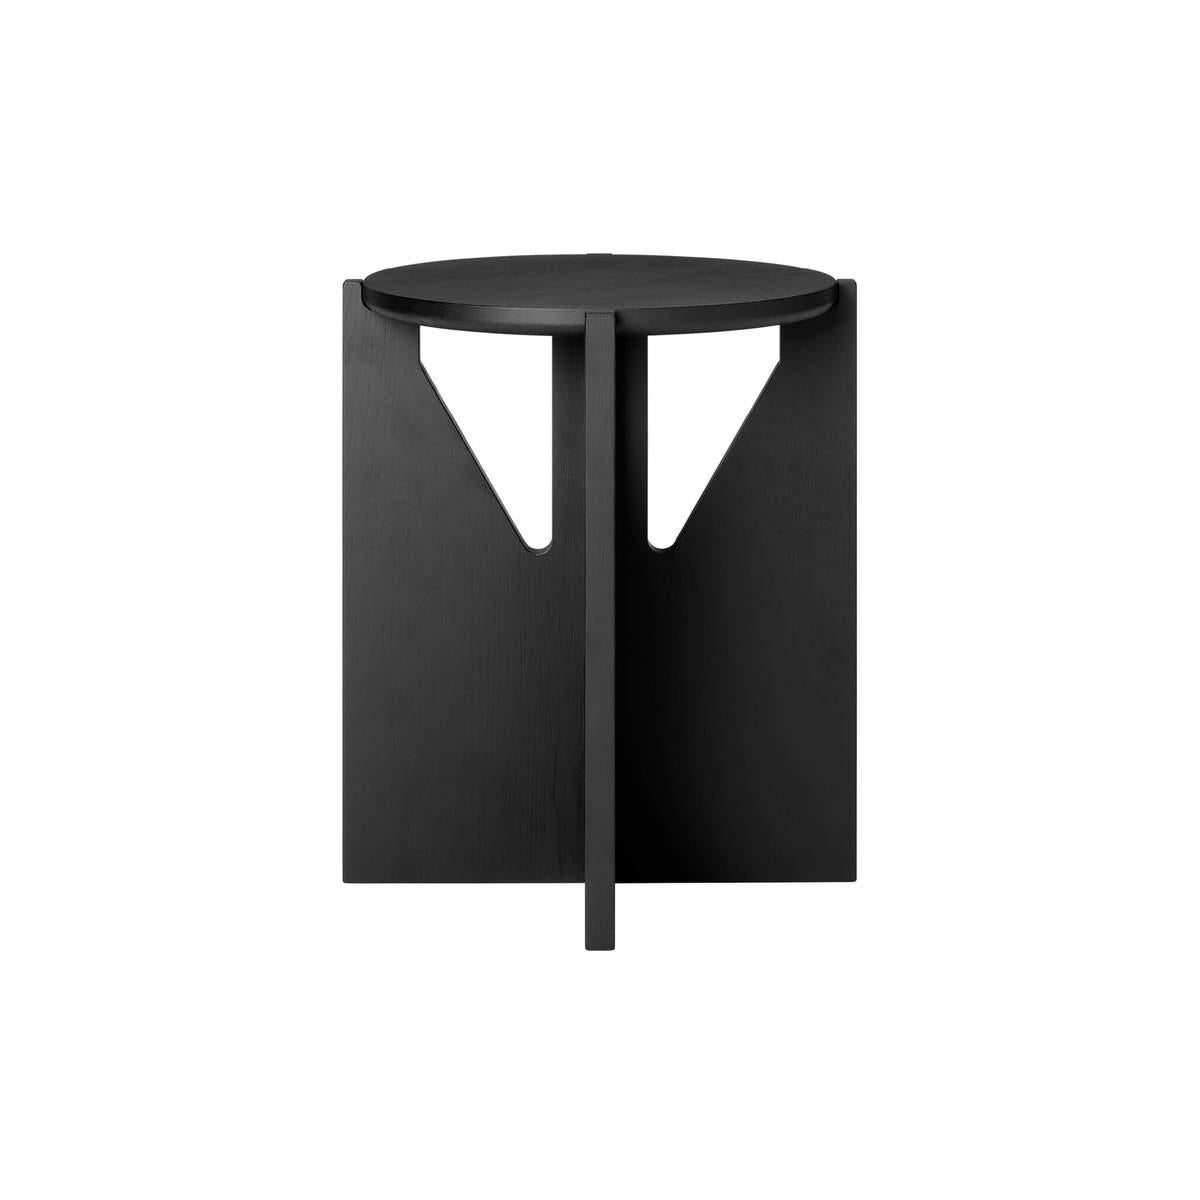 Black stool by Kristina Dam Studio.
Materials: Solid oak with black lacquer. 
Also available in other colors and sizes. 
Dimensions: 36 x 36 x H 42cm.

The Stool from Kristina Dam is an elegant and thoroughly designed piece of flat-pack